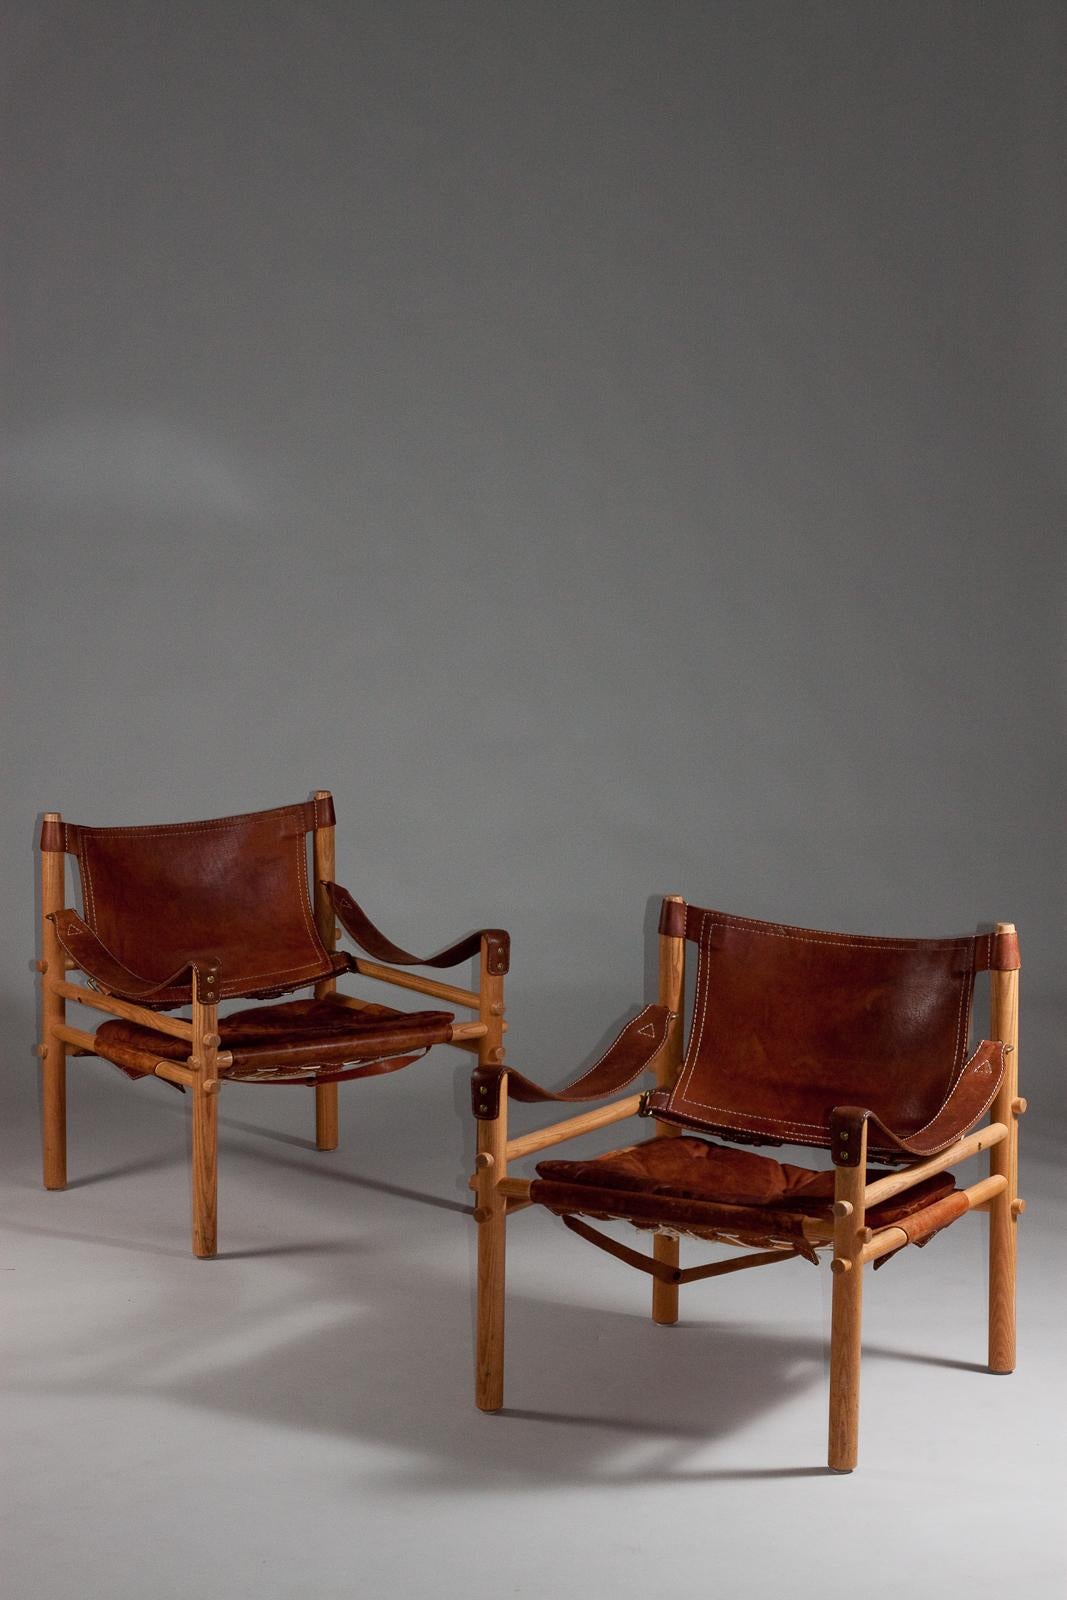 Add a touch of mid-century sophistication to your space with this stunning pair of 1960's Siroccio safari leather chairs by Arne Norell. Crafted in Sweden, these iconic chairs are known for their durable construction, comfortable design, and